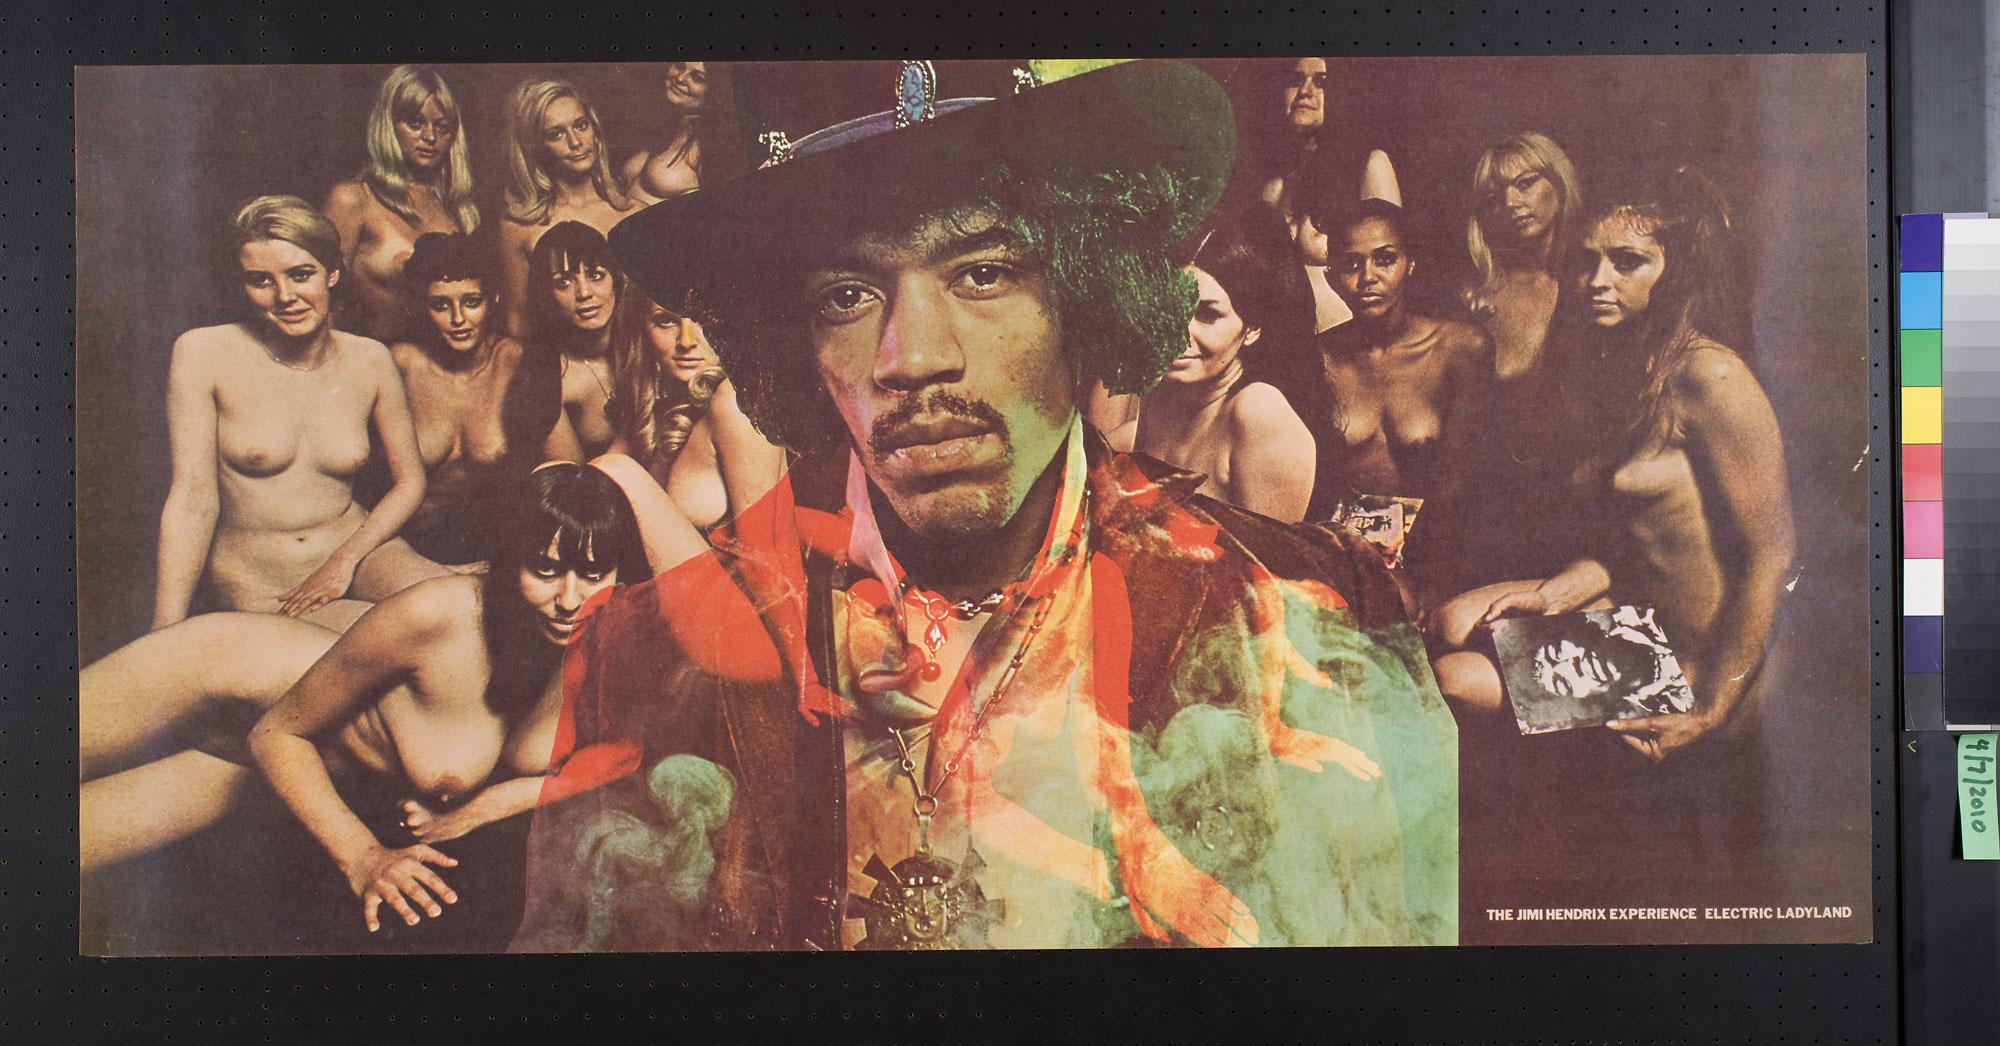 The Jimi Hendrix Experience Electric Ladyland. 